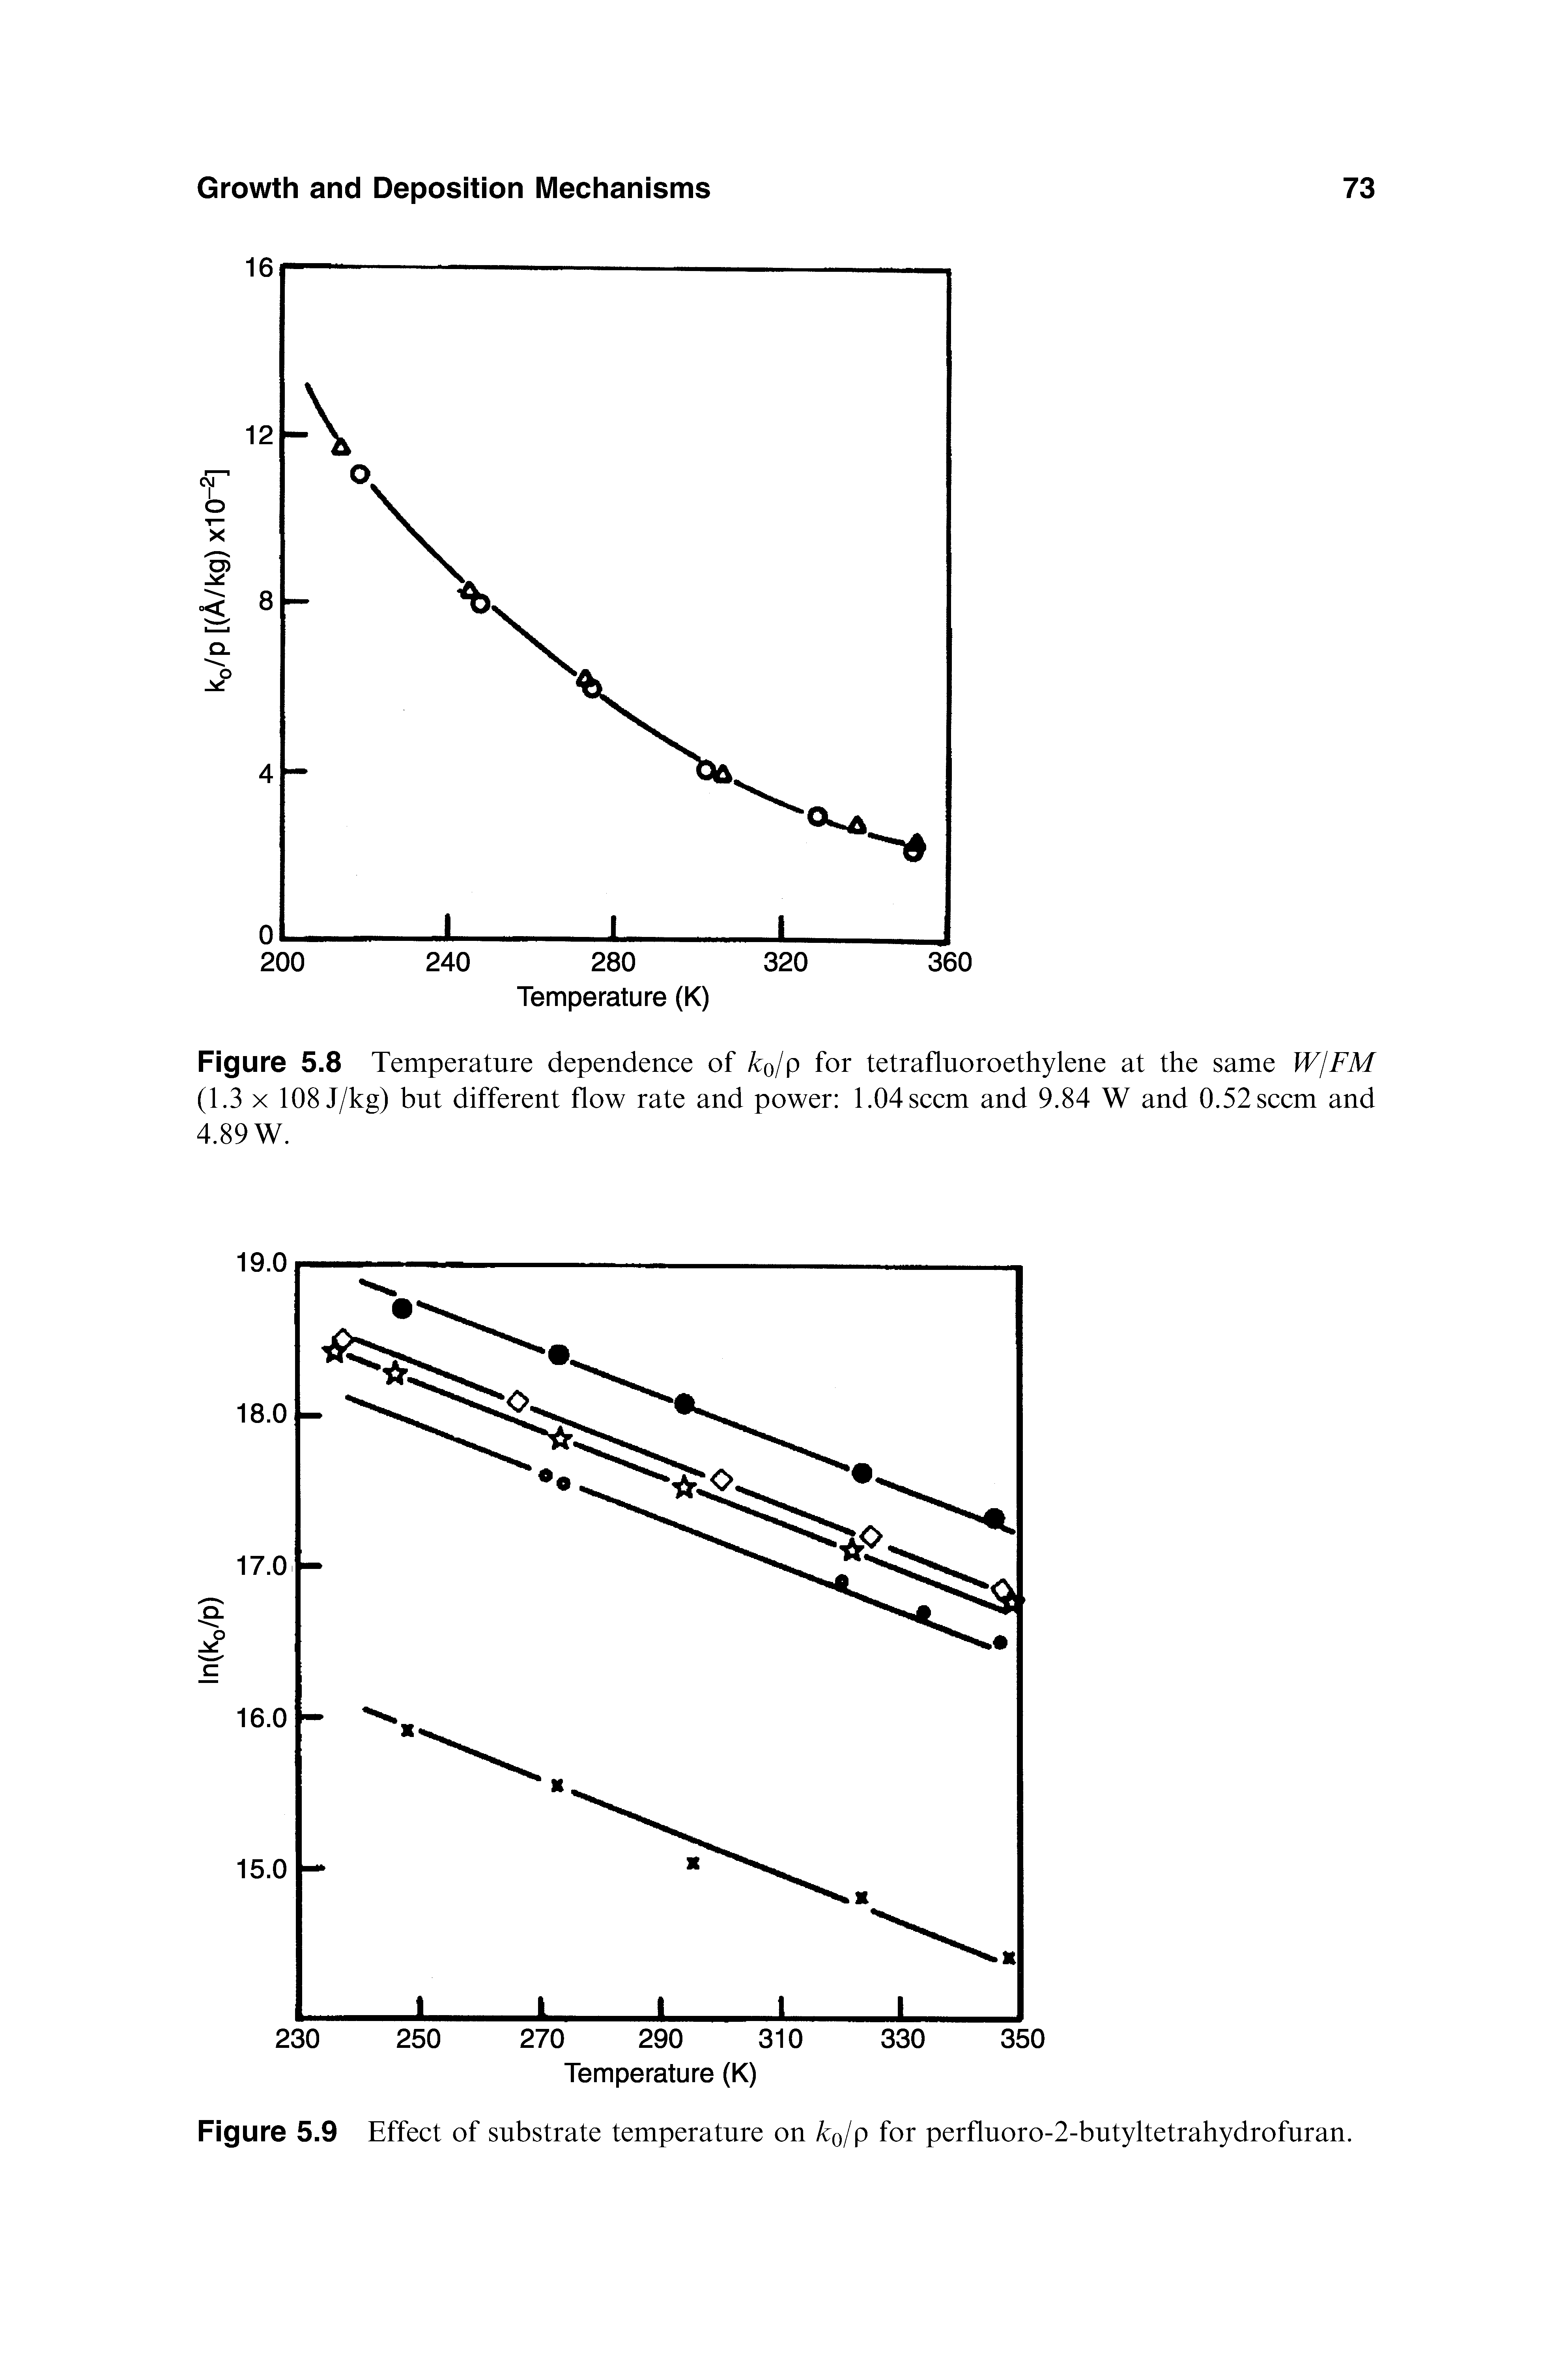 Figure 5.9 Effect of substrate temperature on /co/p for perfluoro-2-butyltetrahydrofuran.